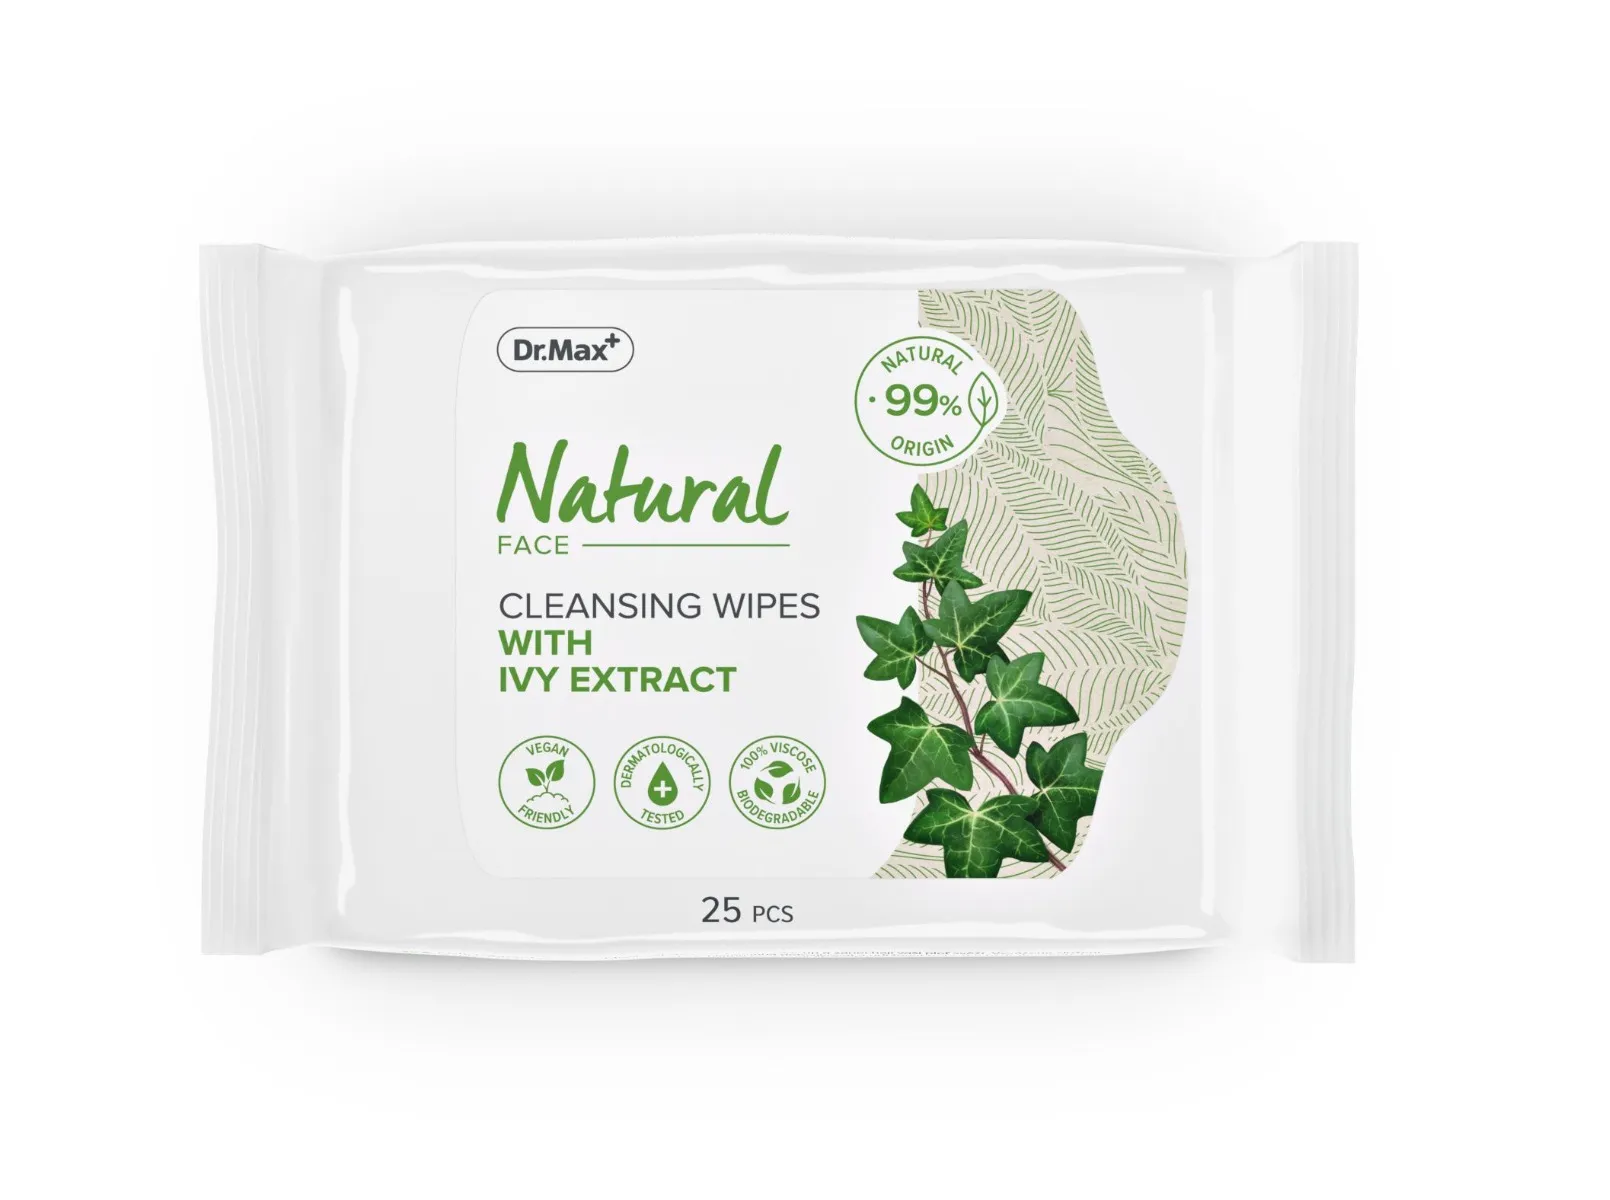 Dr.Max Natural Cleansing Wet Wipes